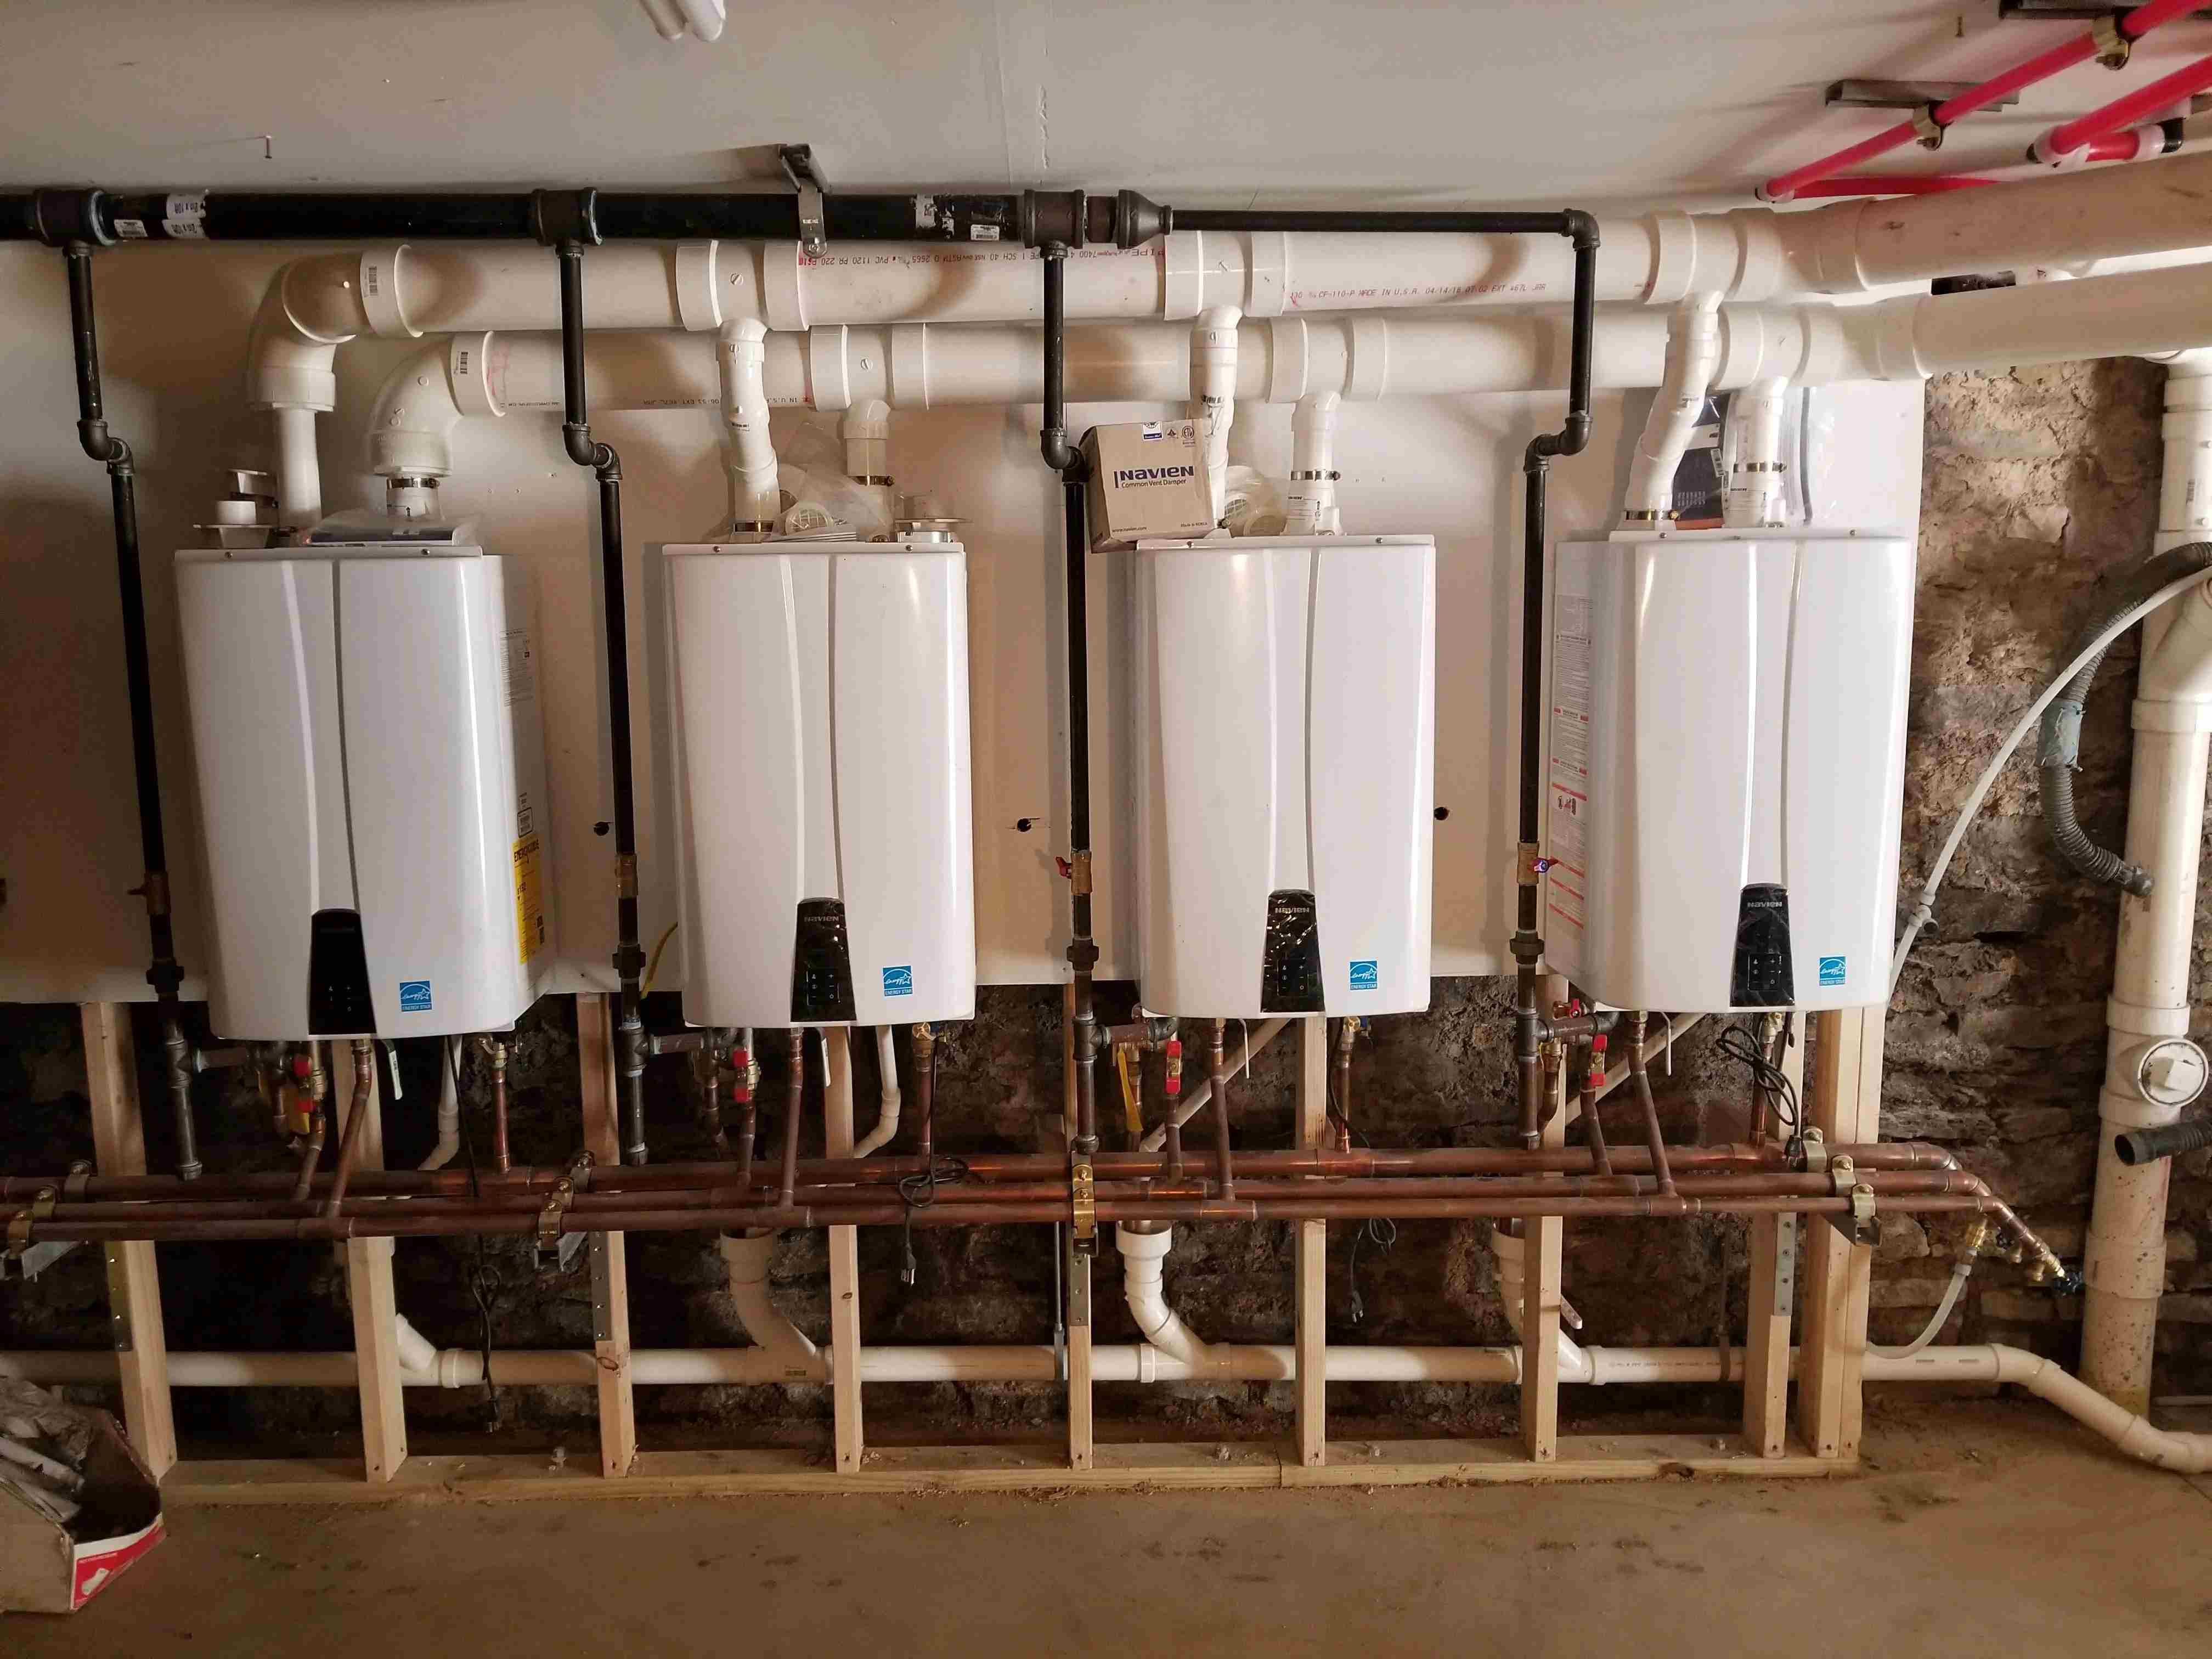 How To Flush Navien Tankless Water Heater